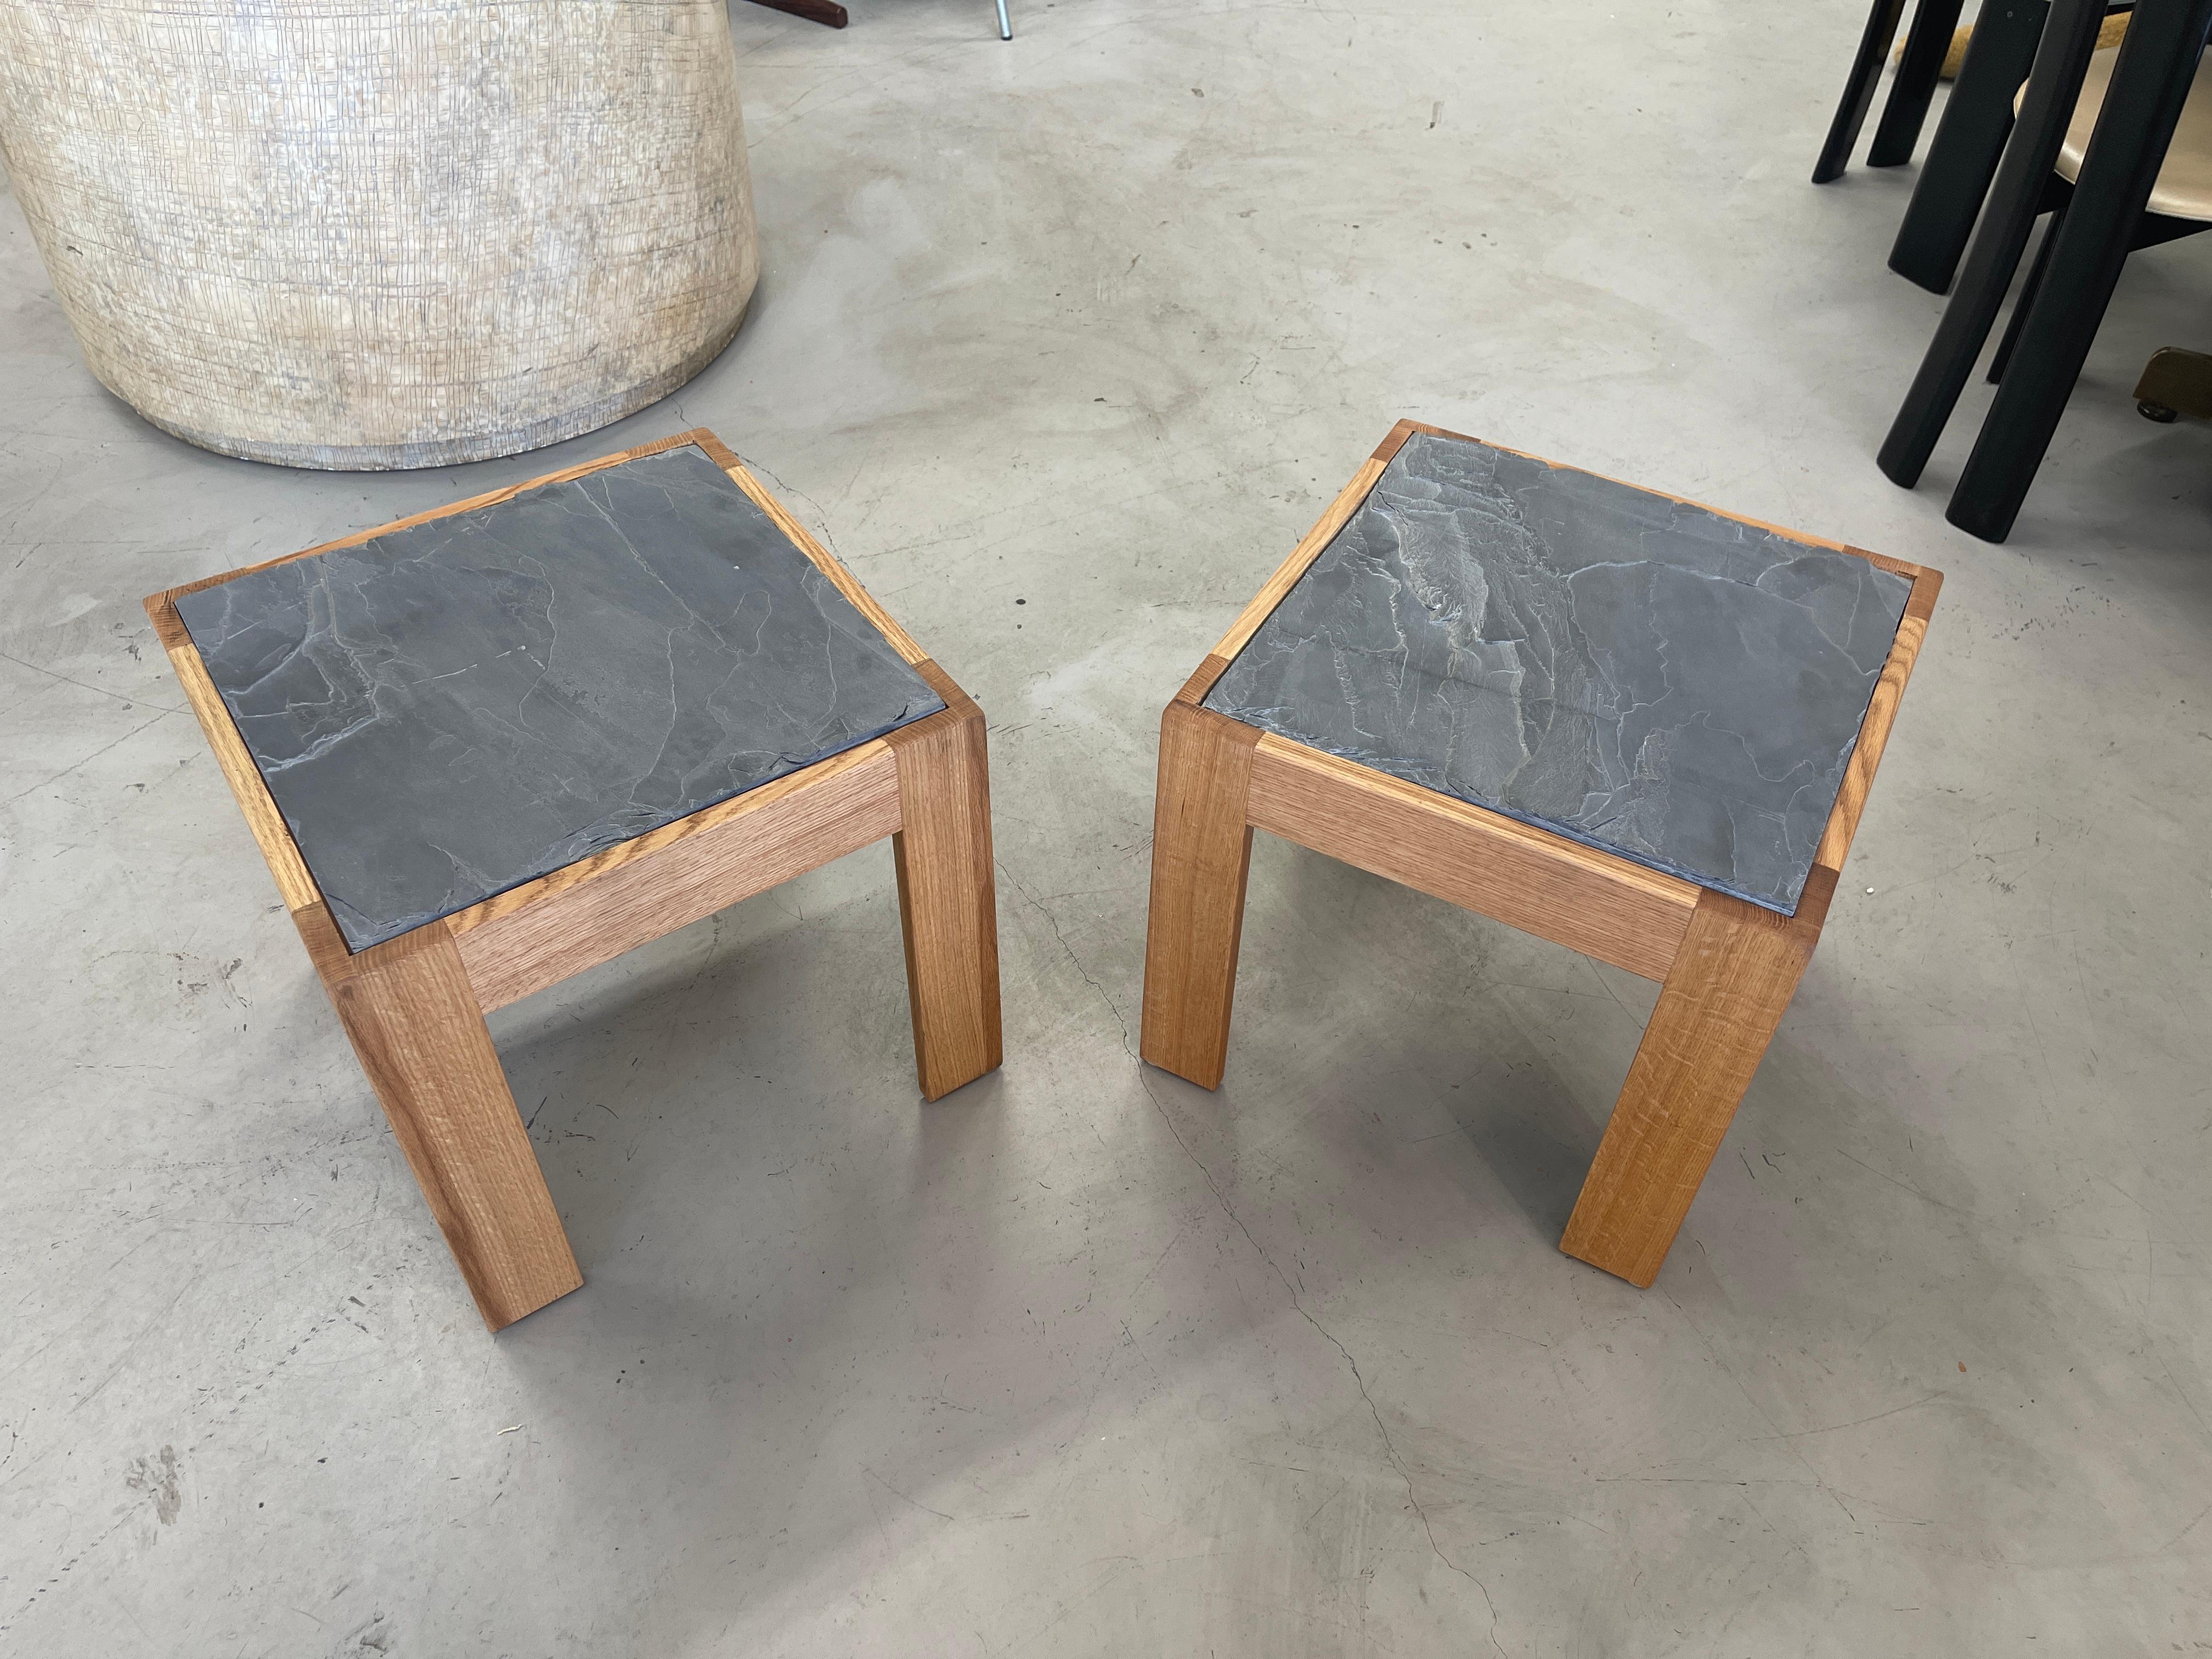 Hand-Crafted Slate Top Oak Tables For Sale